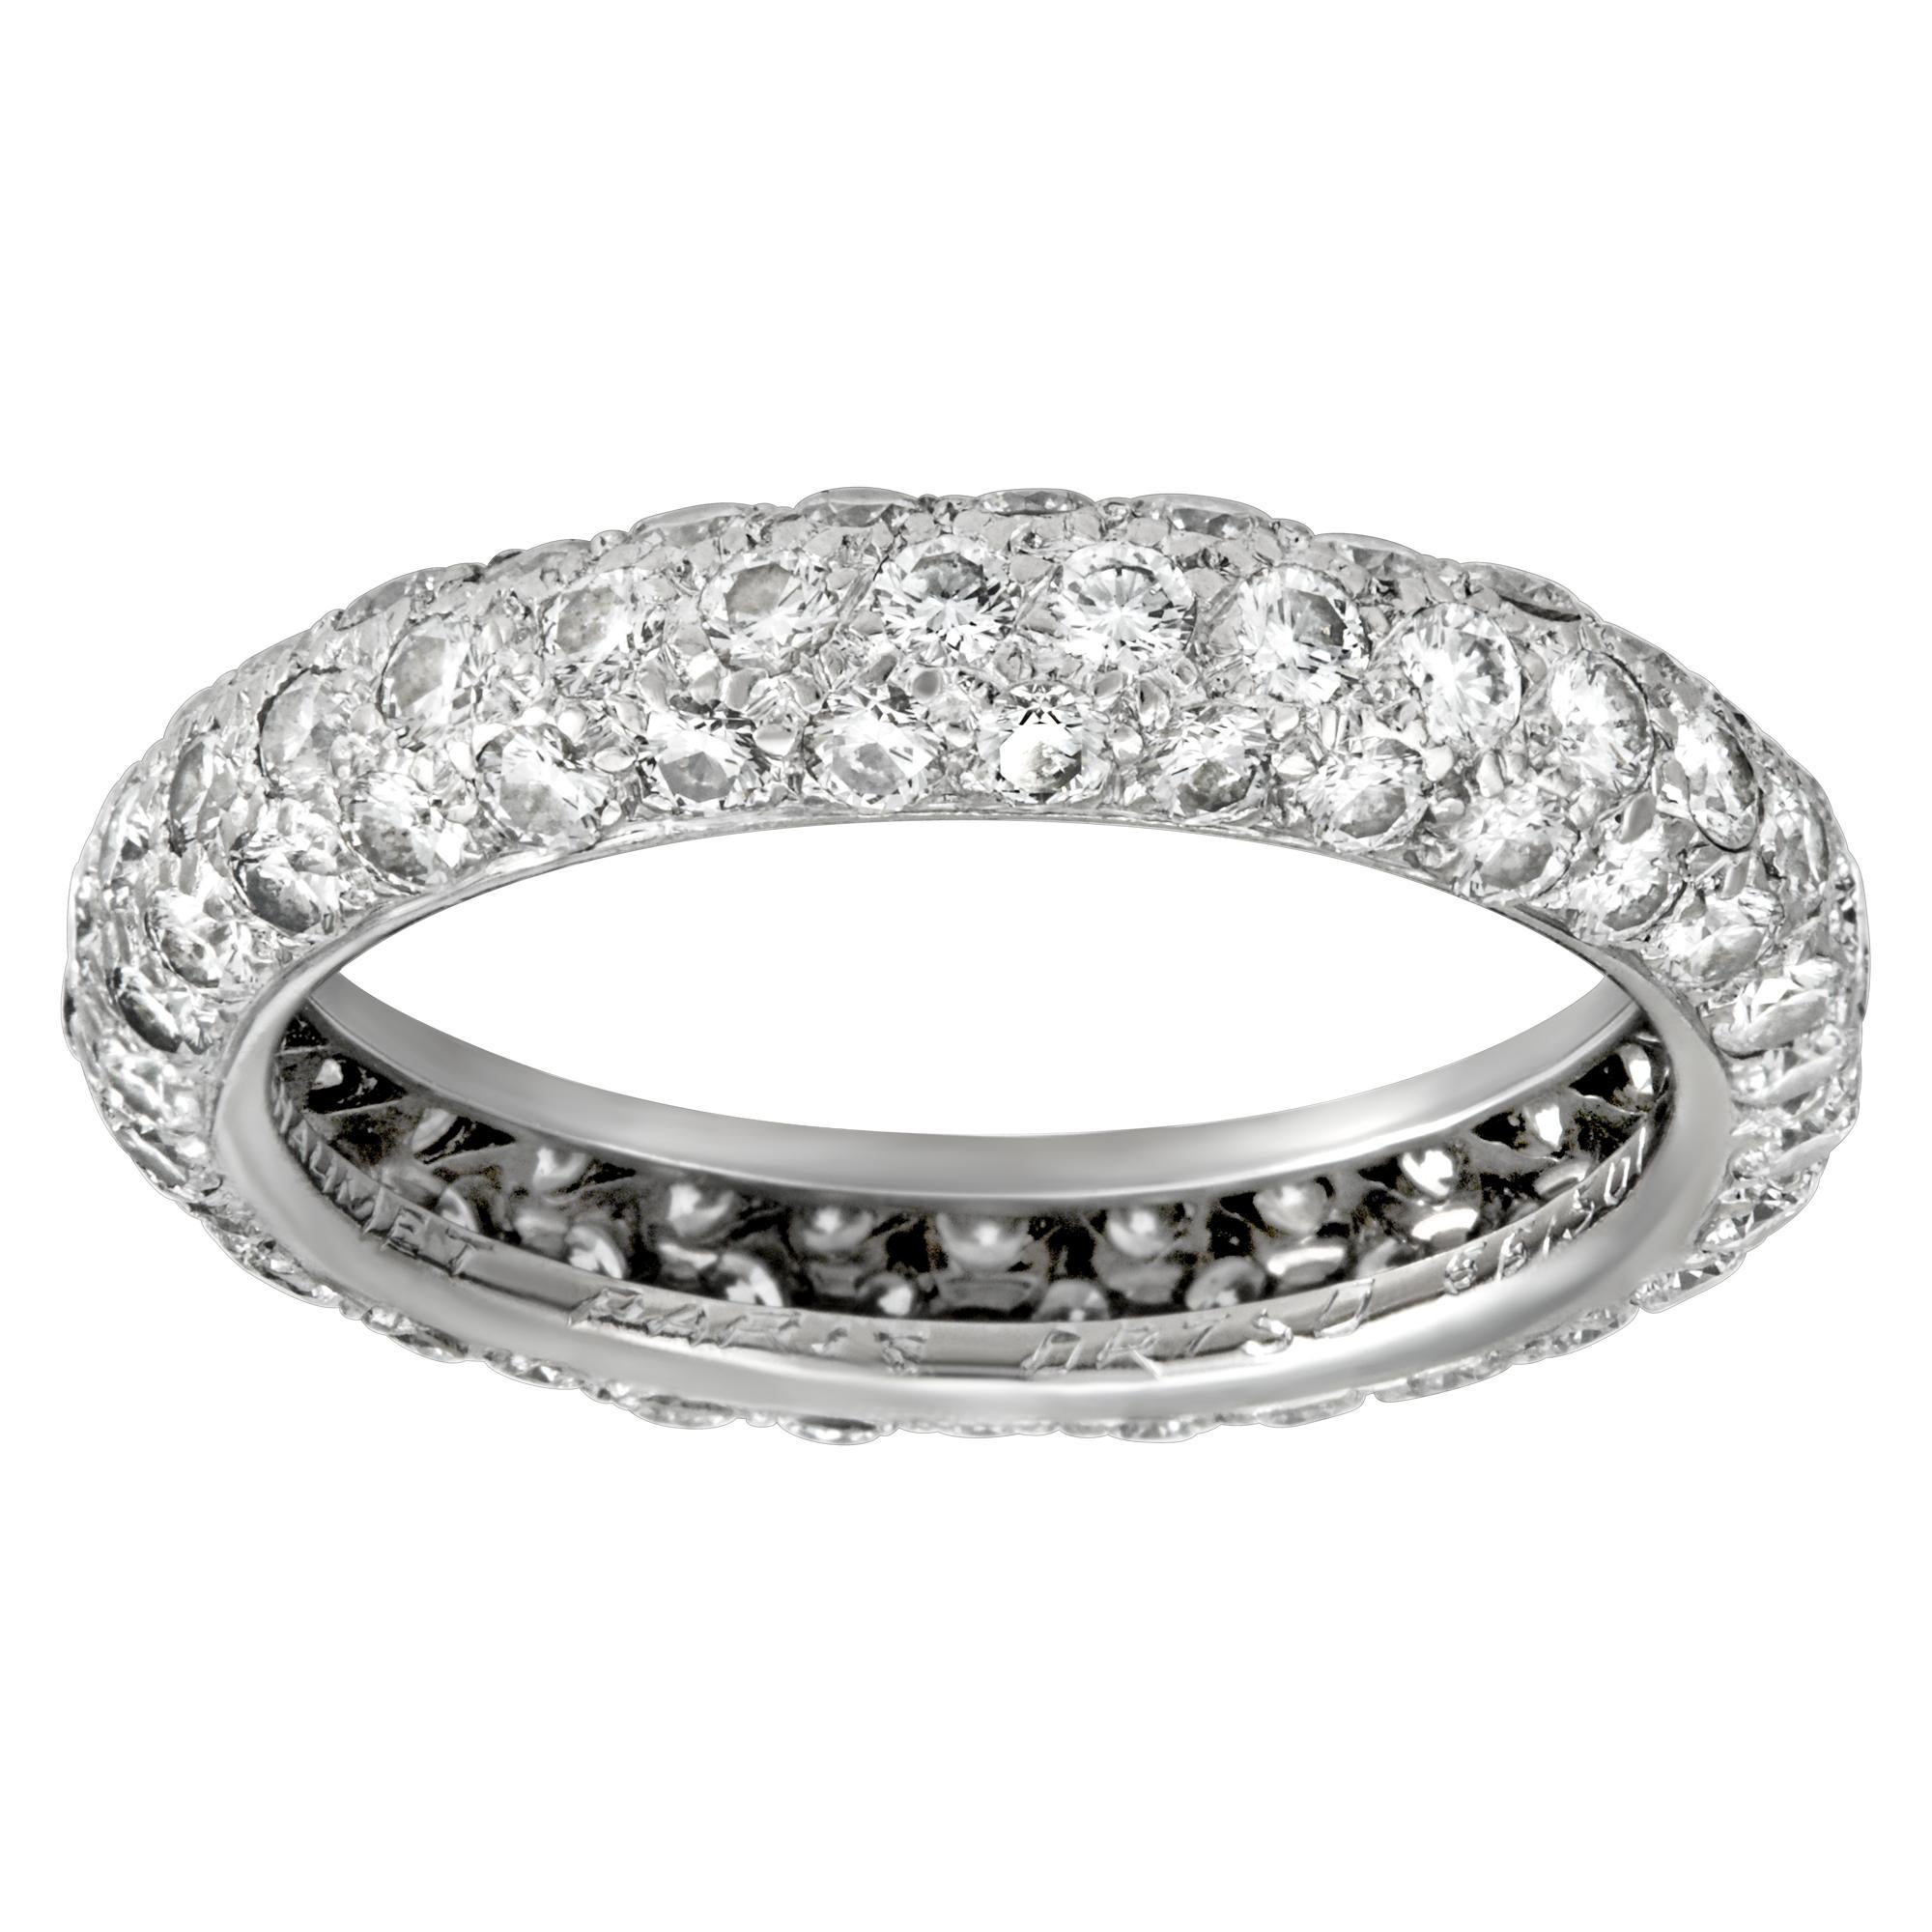 Chaumet eternity diamond band in white gold For Sale